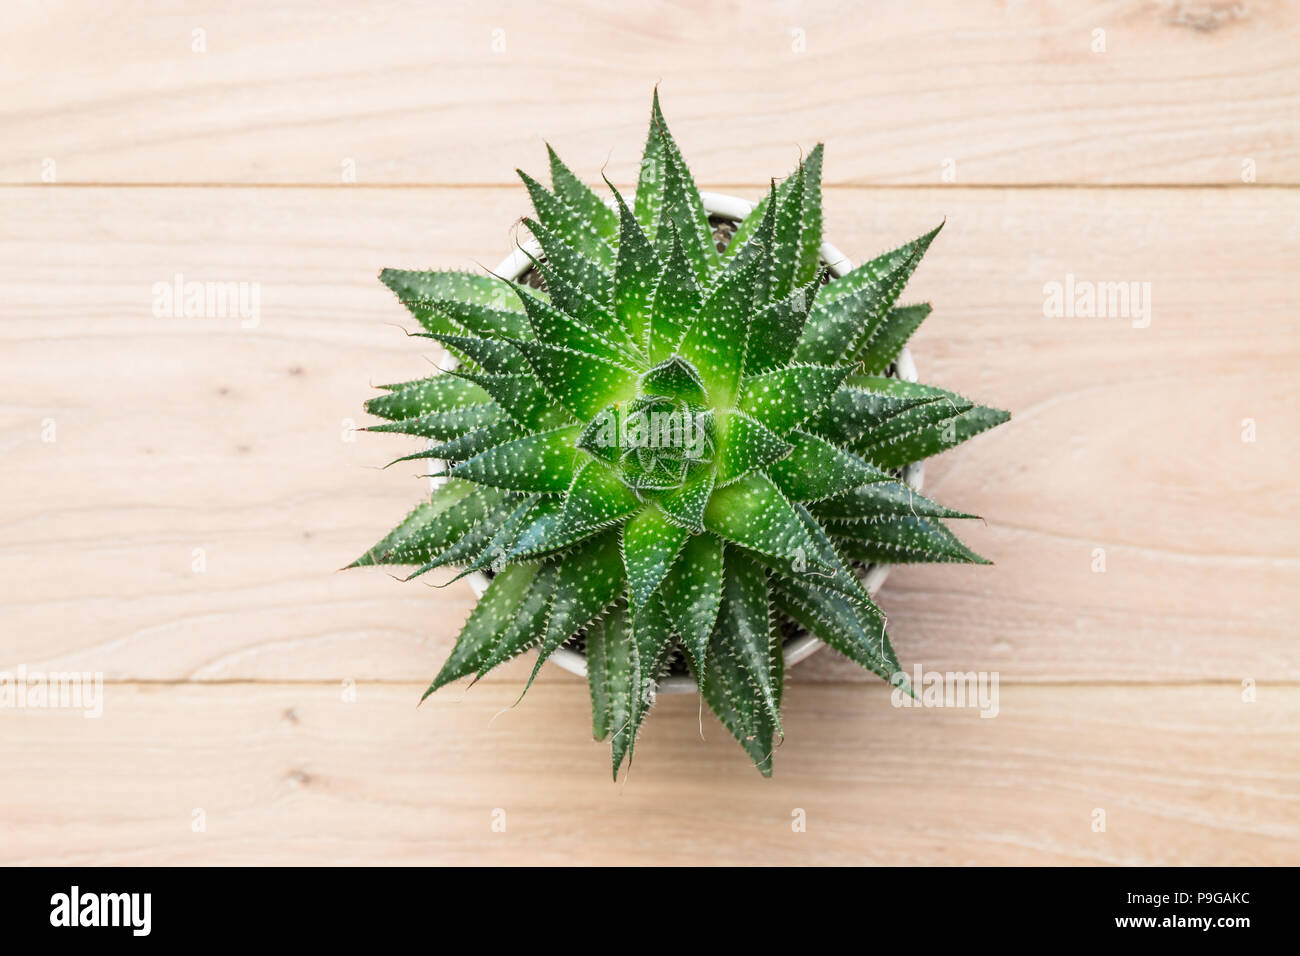 Potted aloe vera on the table Stock Photo